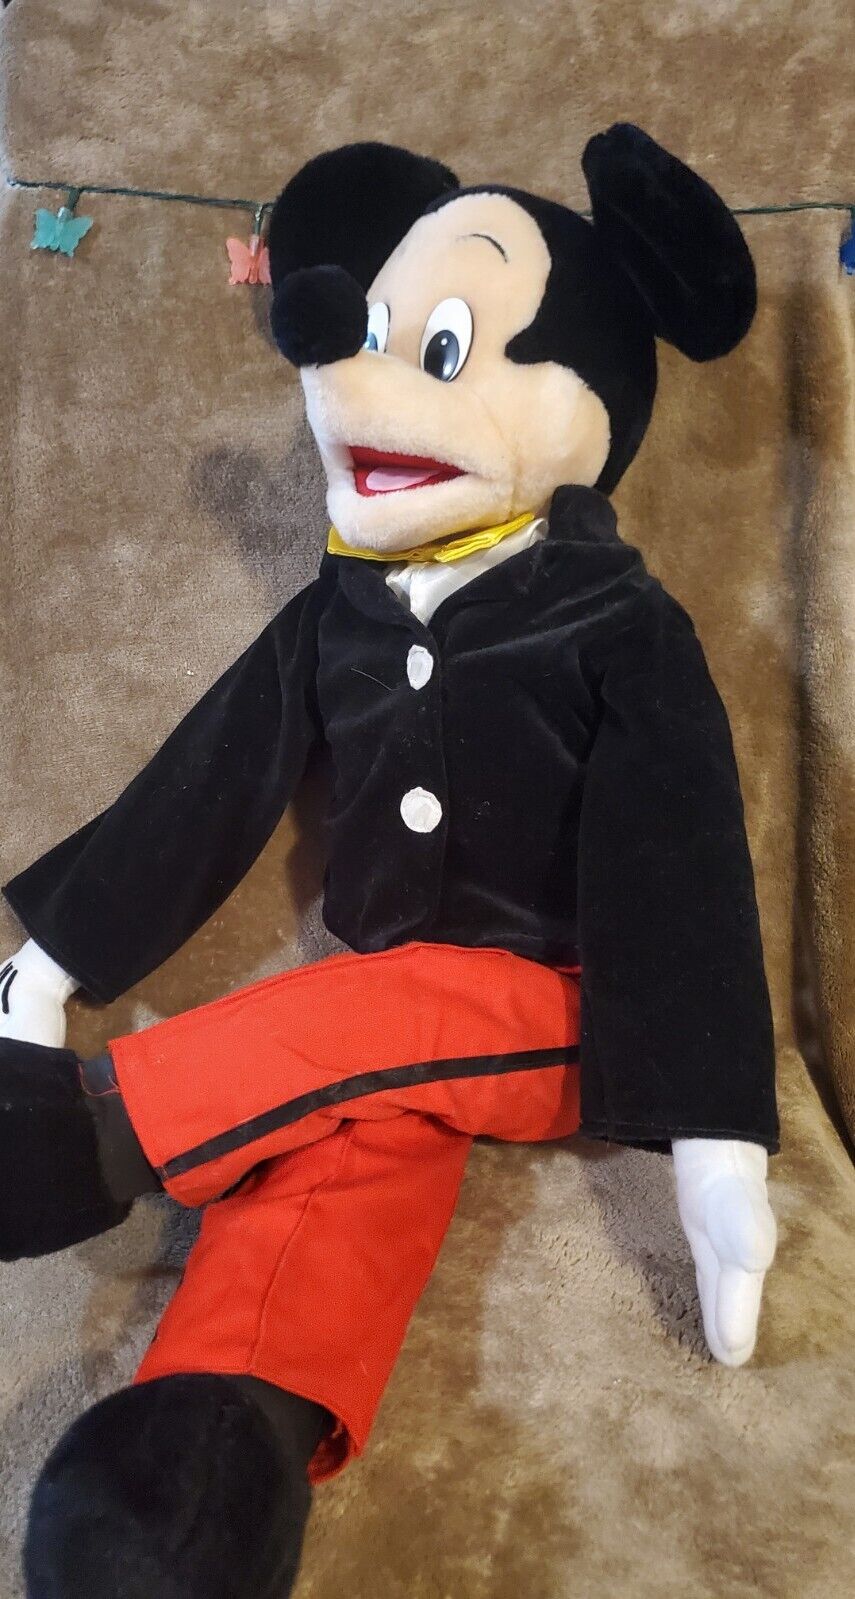 Vintage Micky Mouse Plush Puppet. Dressed In Tux Red Pants Black Jacket & Bow